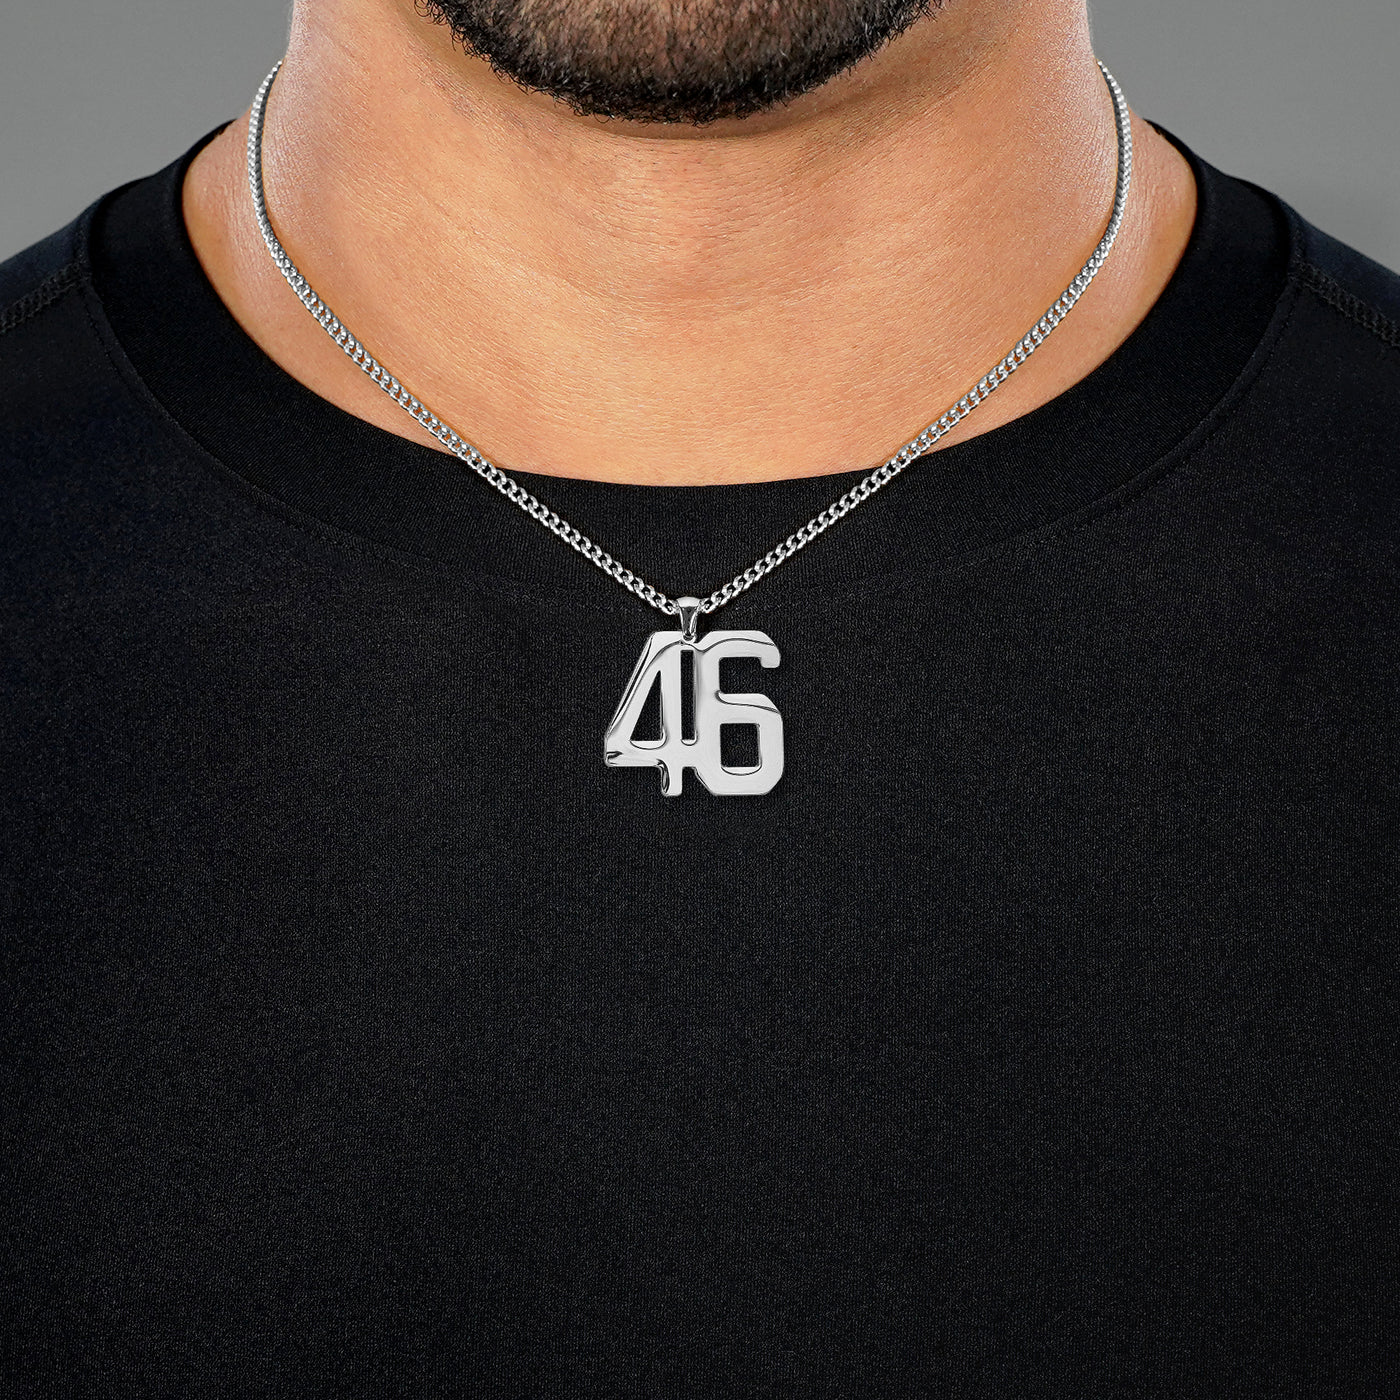 46 Number Pendant with Chain Necklace - Stainless Steel